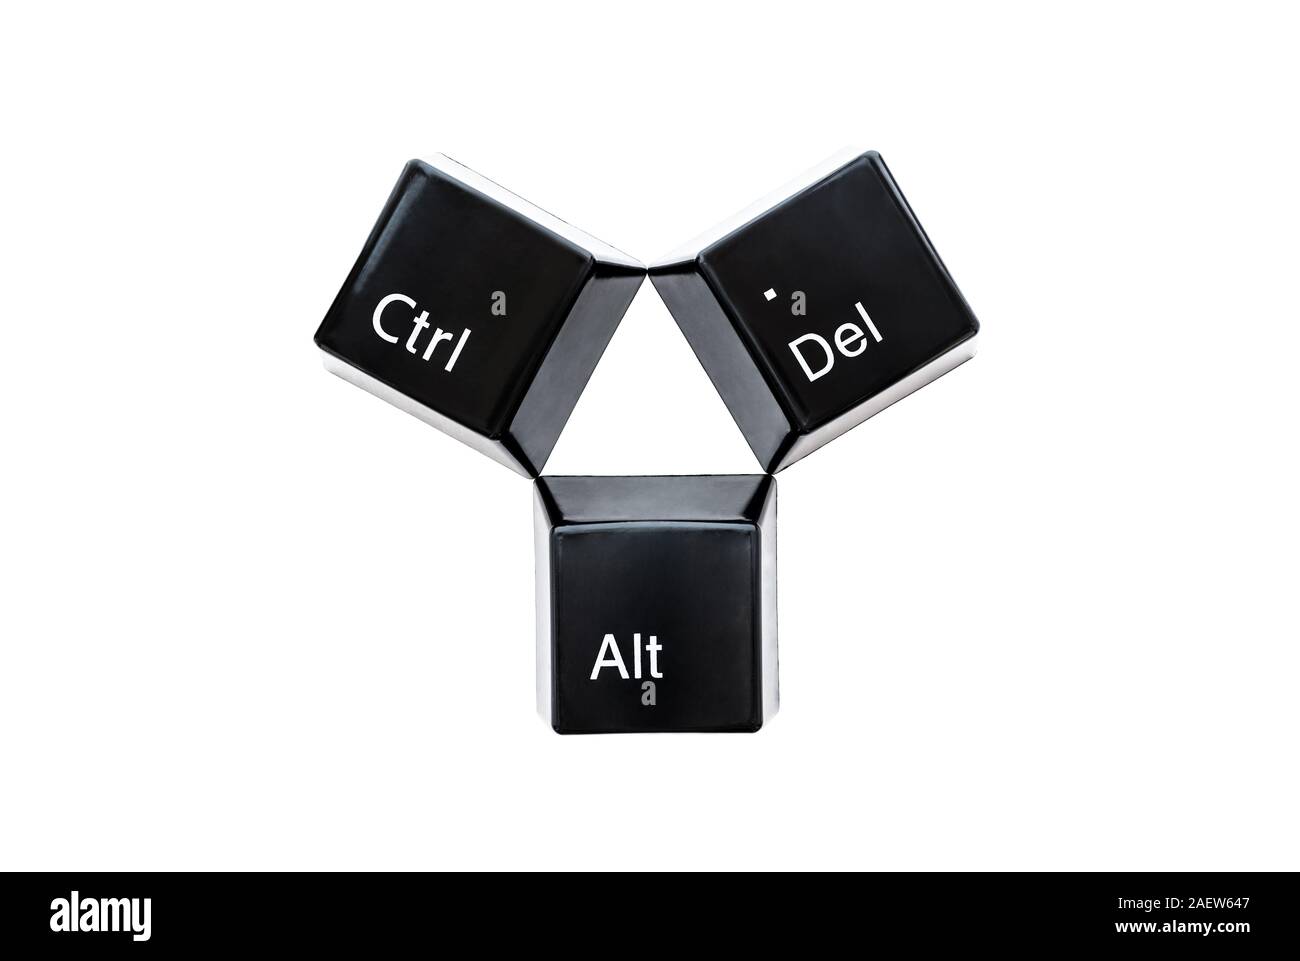 Ctrl, Alt, Del keyboard computer buttons closeup isolated on white background. Stock Photo